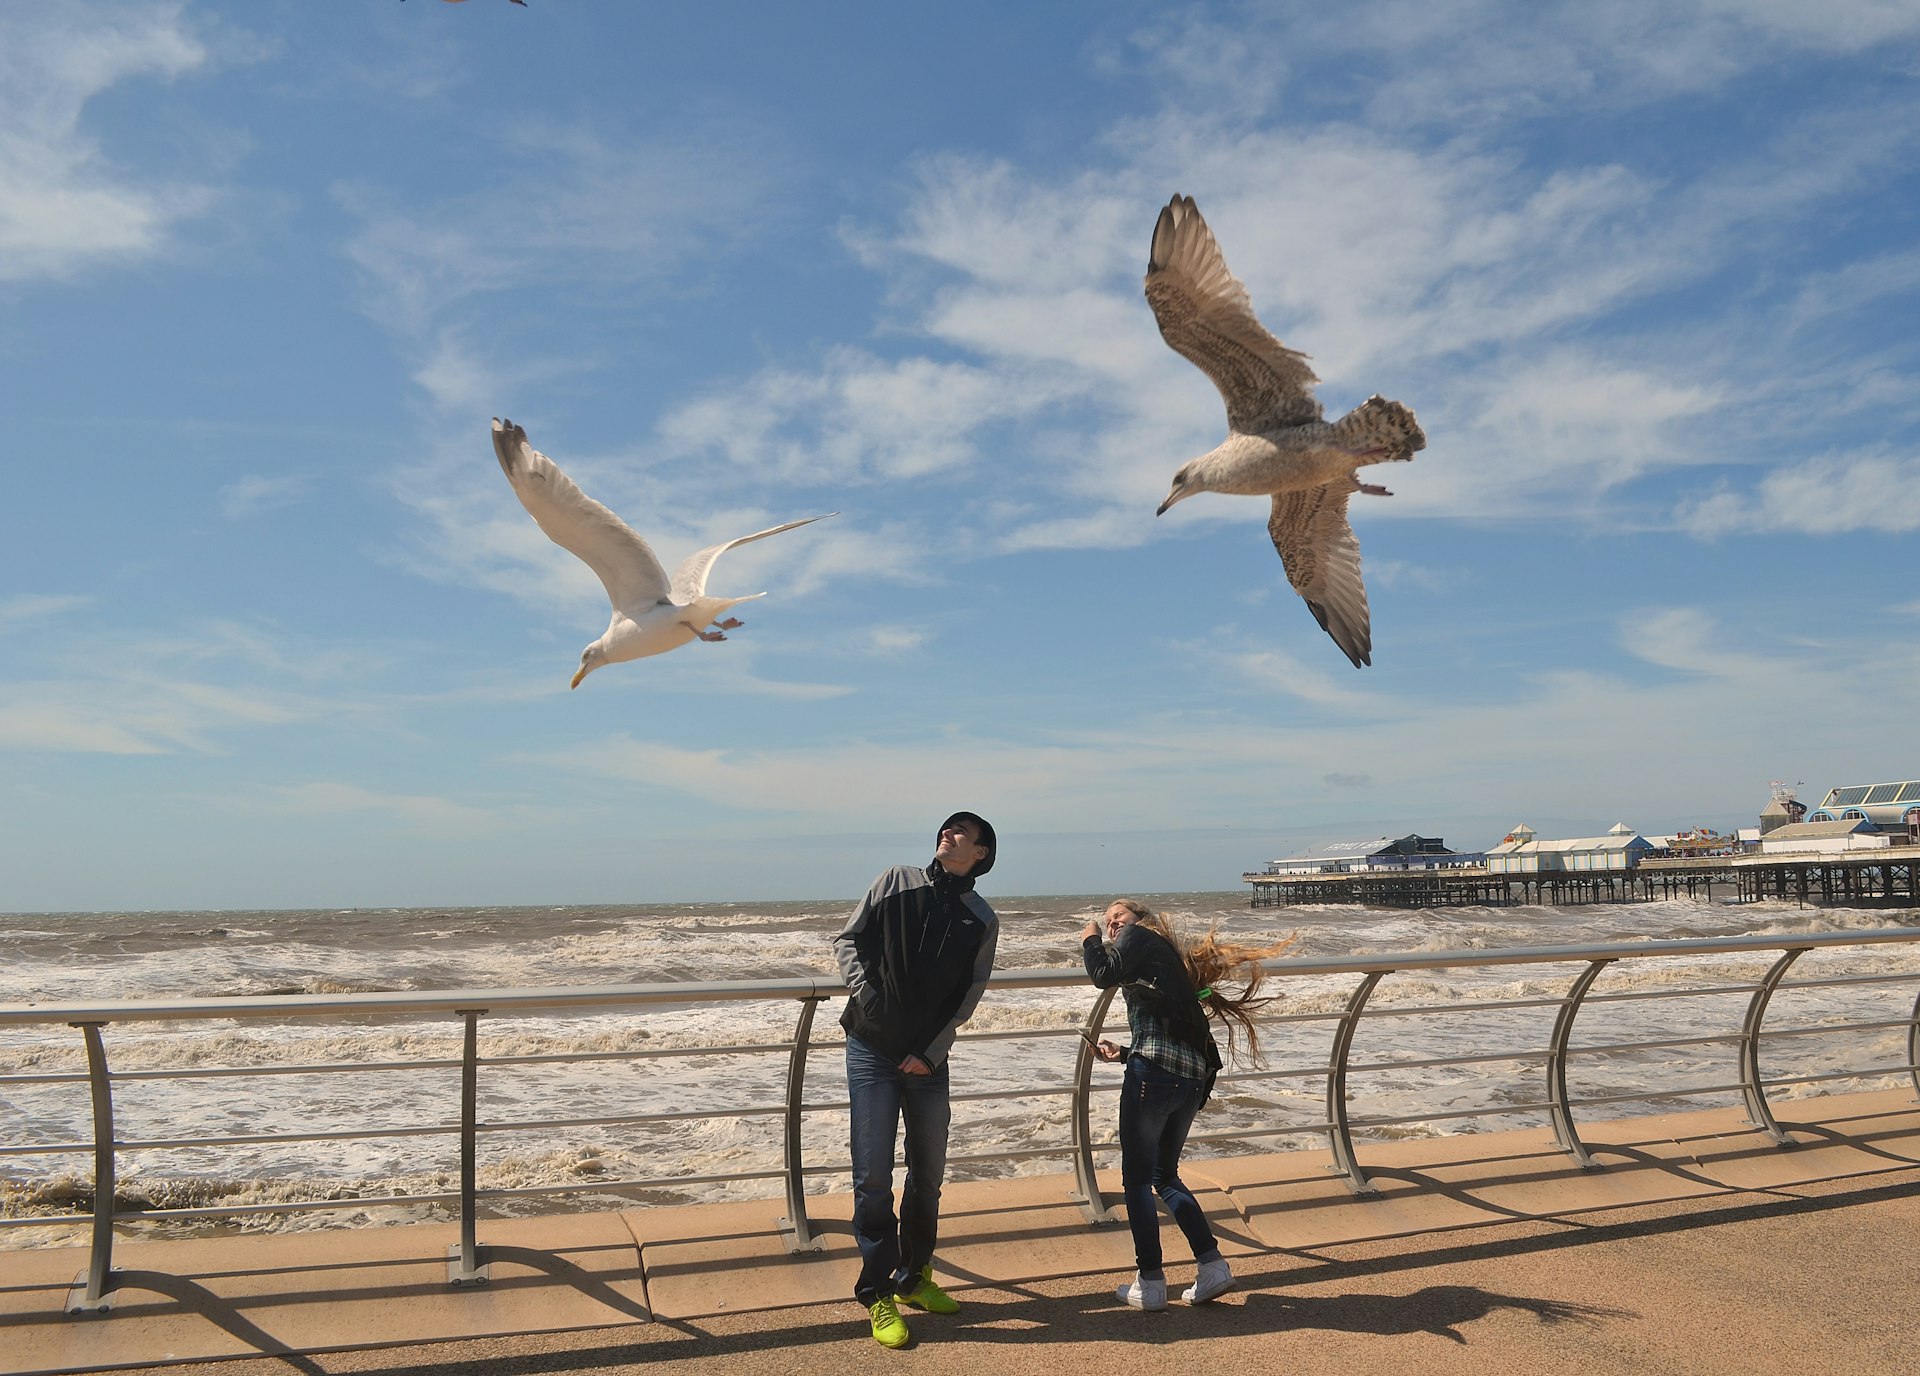 Two people by the beach with seagulls flying overhead